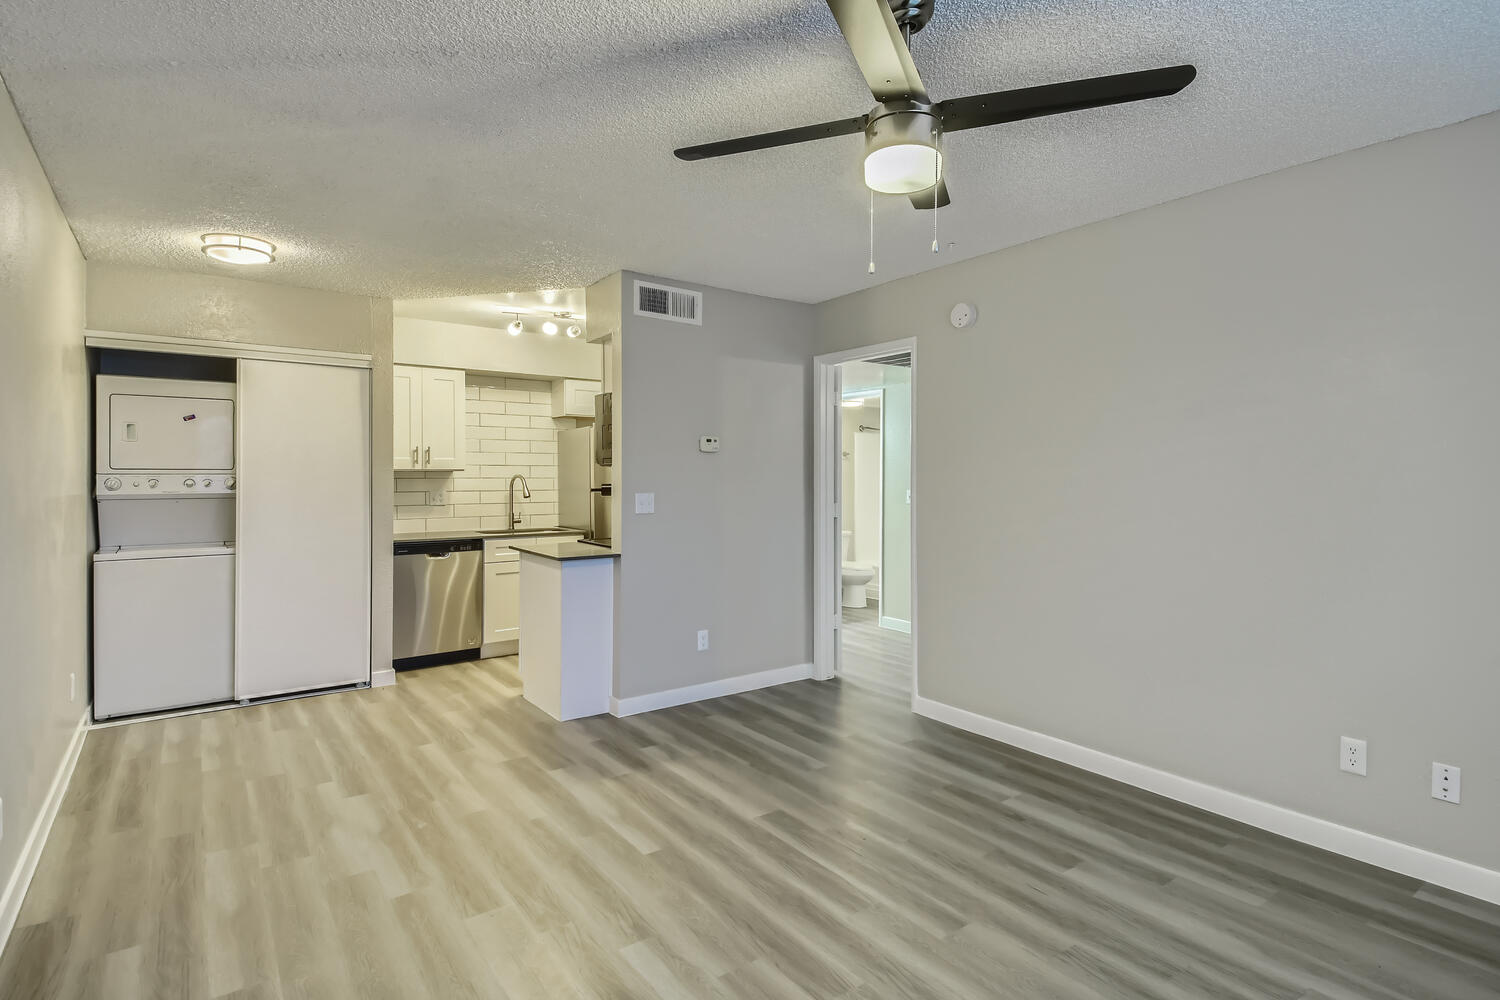 An open-concept living space with a kitchen and a closet with a washer and dryer at Rise North Ridge.